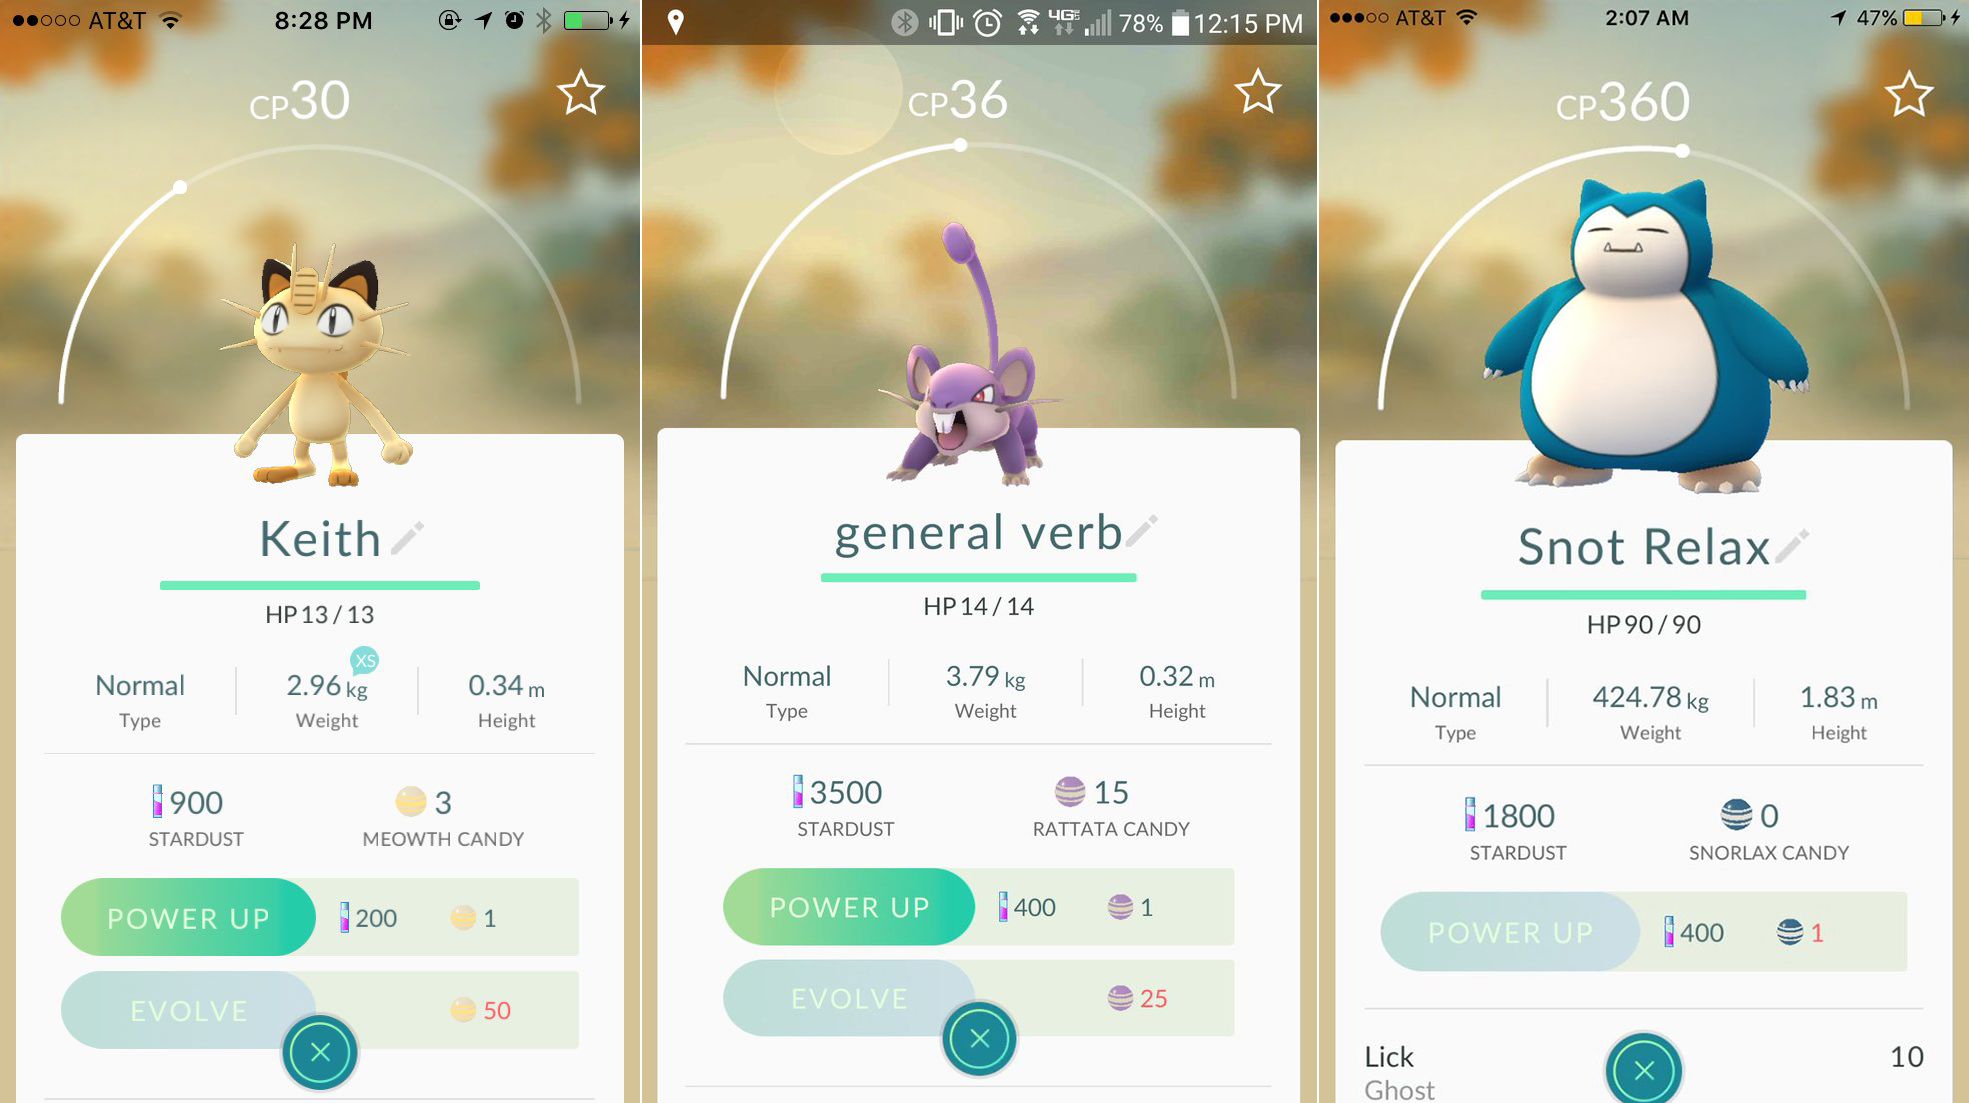 Detail Images Of Pokemon With Names Nomer 42